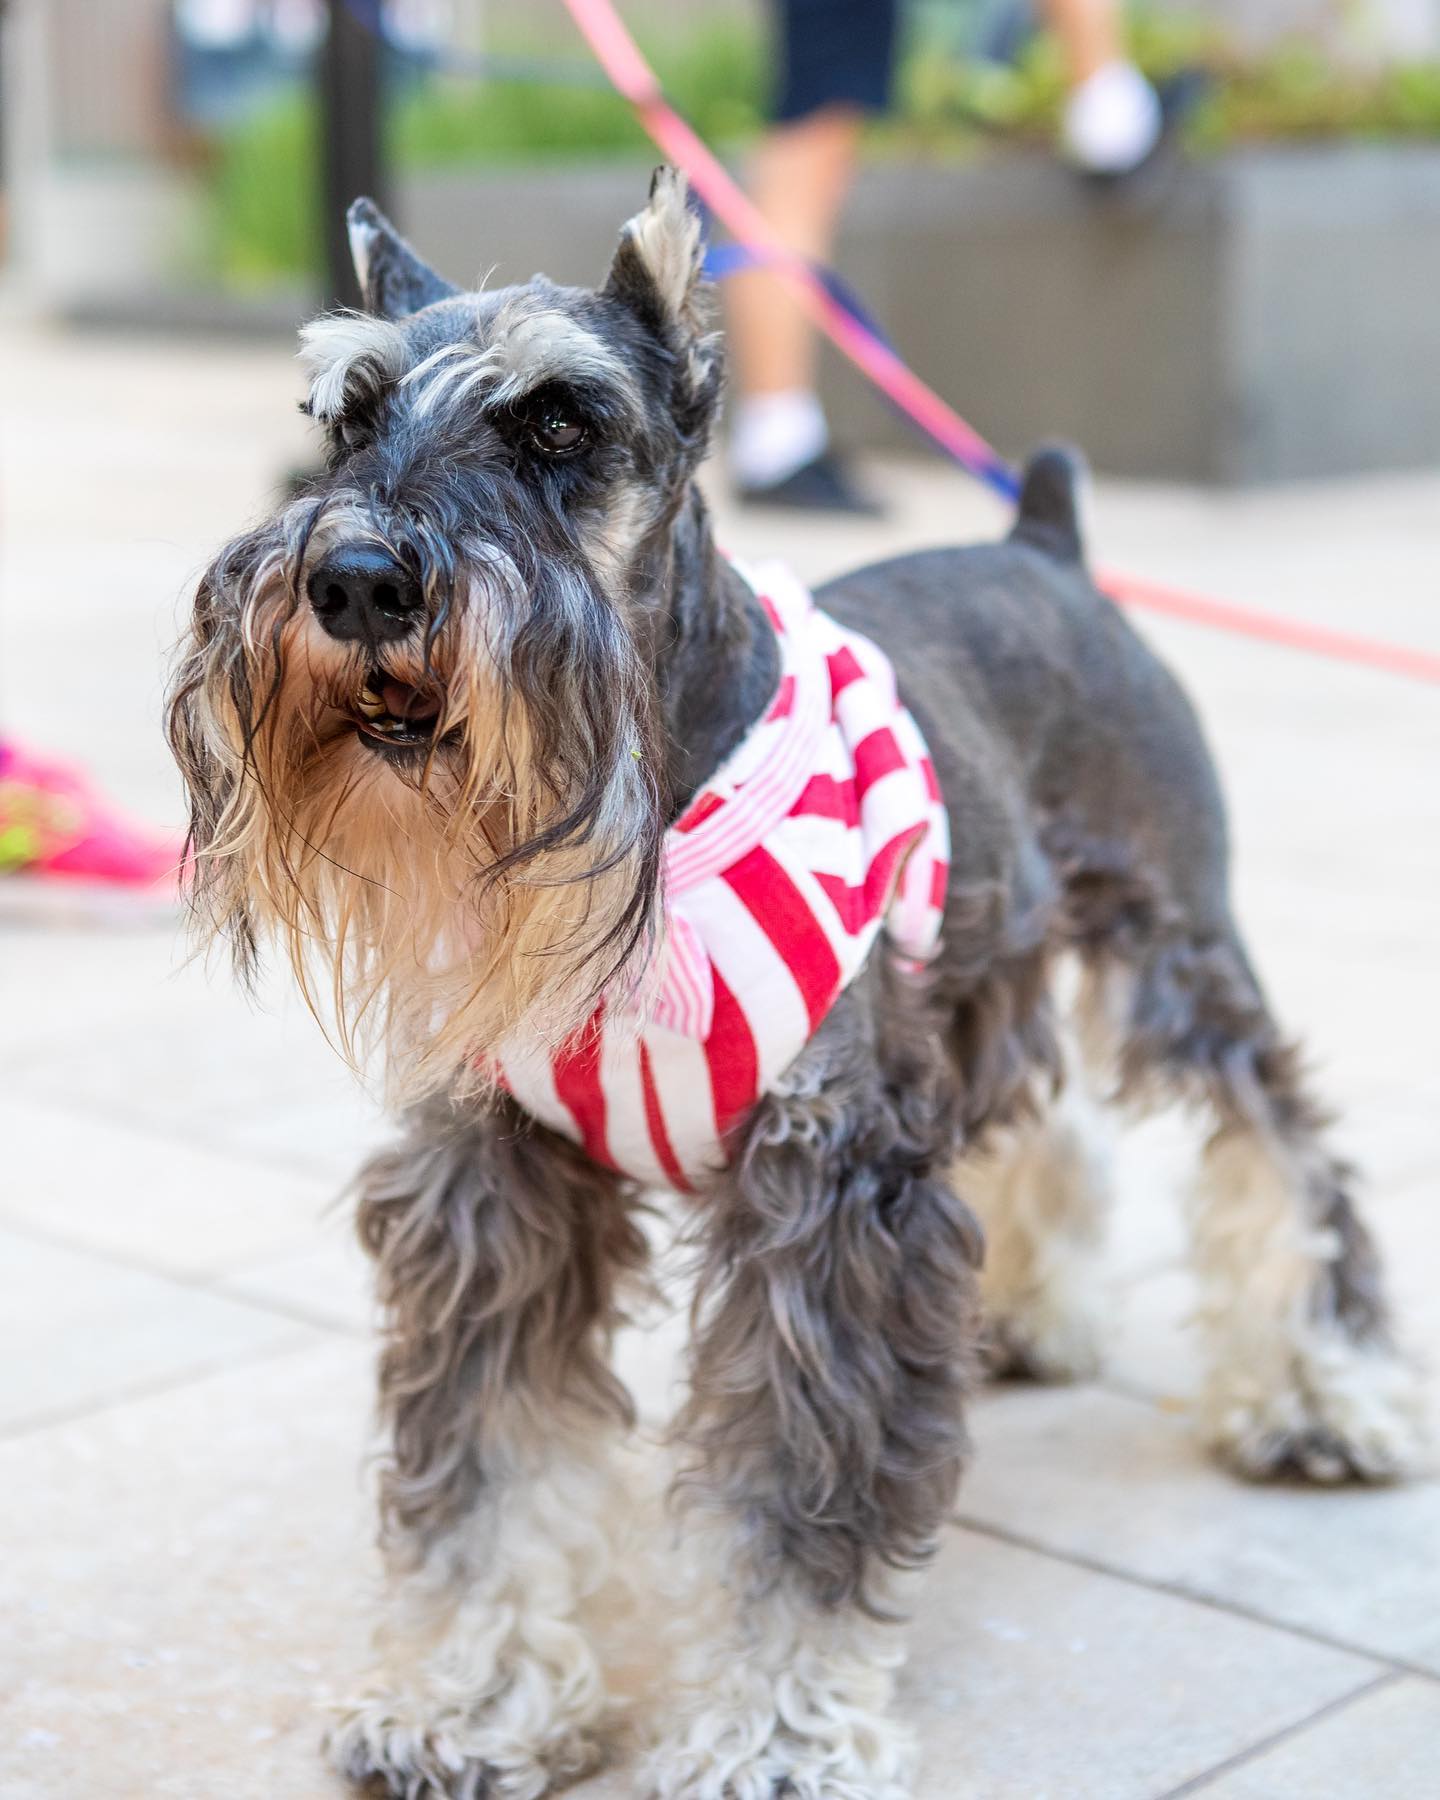 Bring your family and furry friends to the Aloha Pet Fair at Ward Village this Saturday and Sunday from 10am to 5pm, where you’ll find over 30 vendors offering pet supplies and gifts, demonstrations, expert talks, and giveaways. Learn more on our Holiday Guide link in bio.